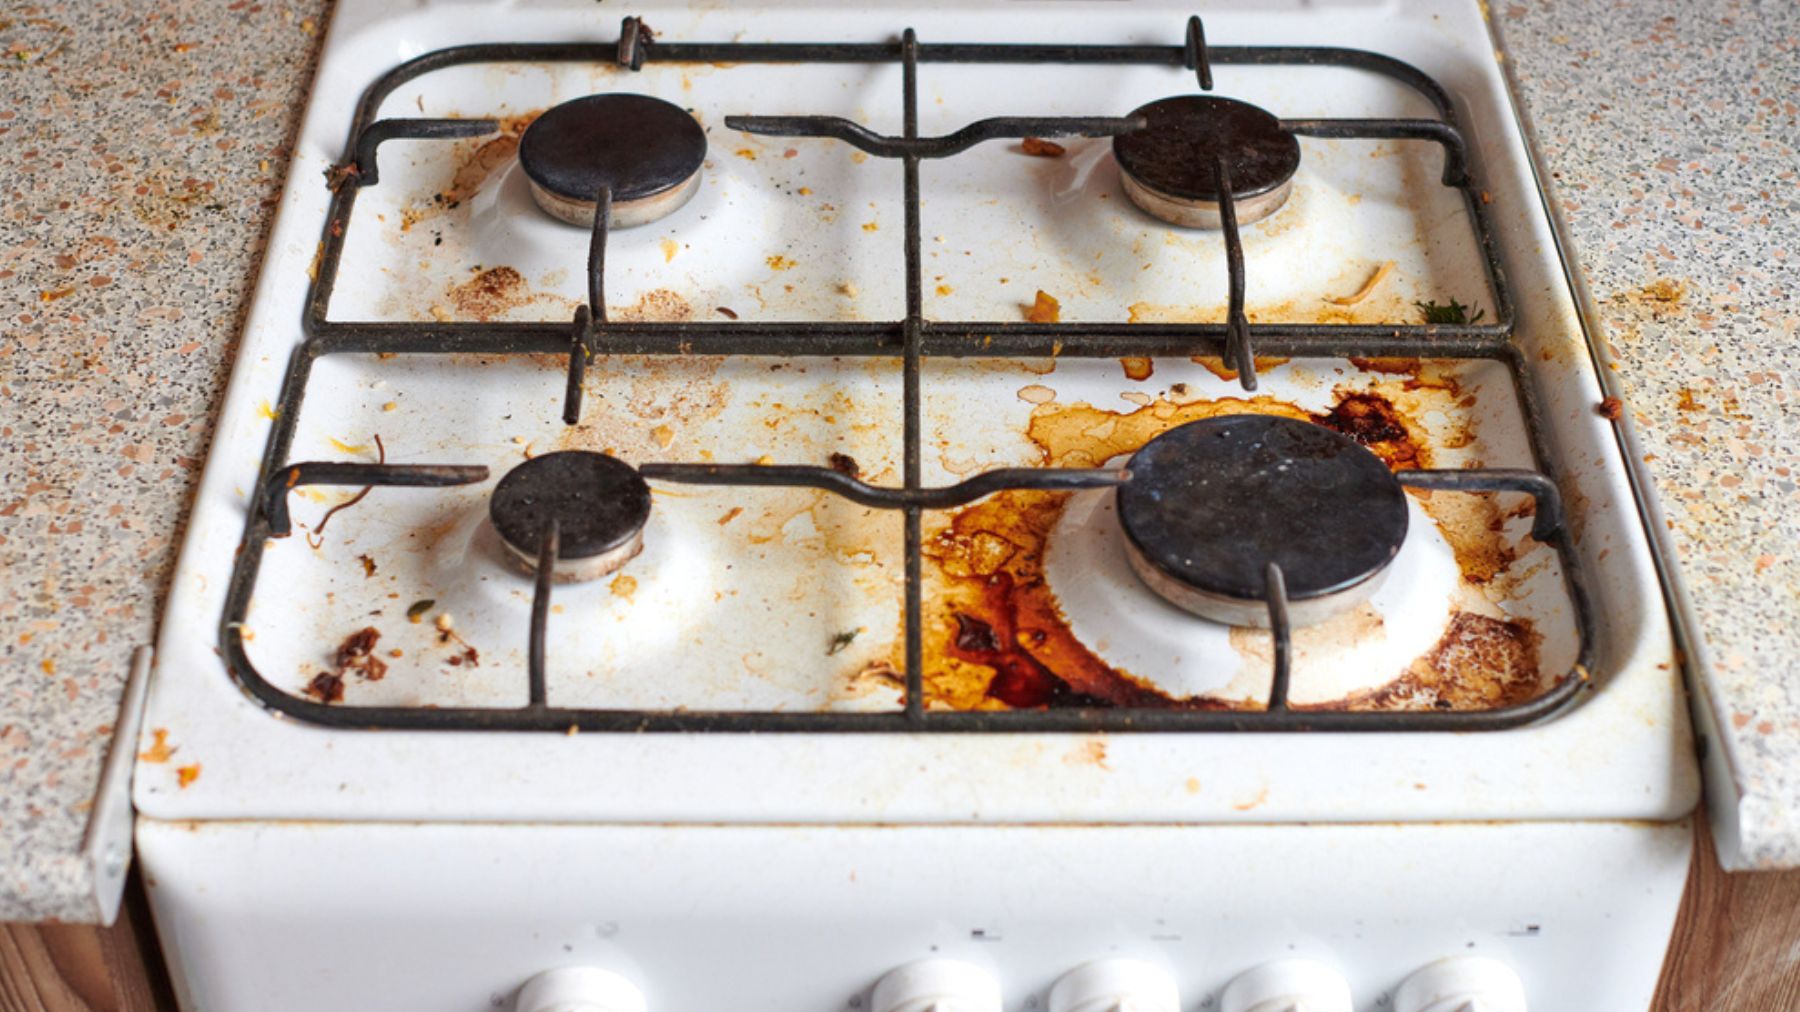 Cooktop and stoves: how to clean them through 9 natural methods